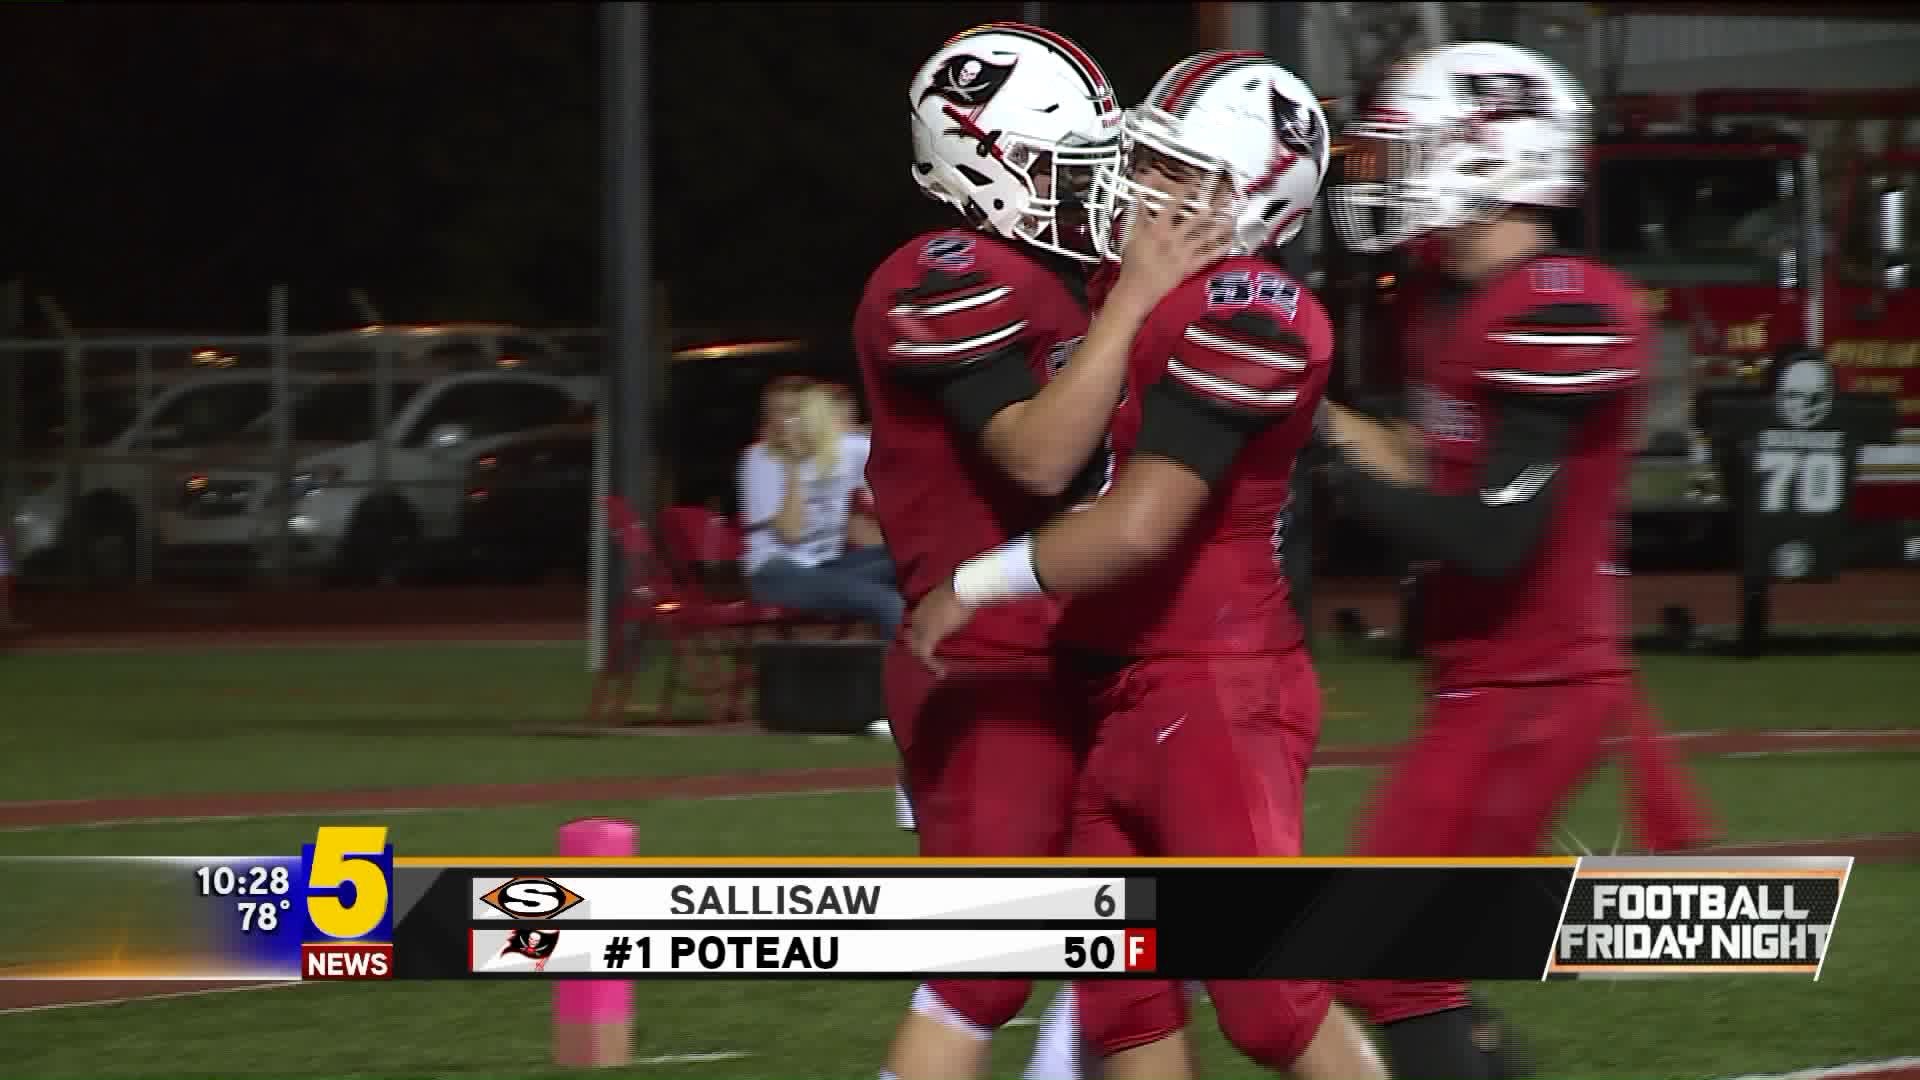 Poteau routs rival Sallisaw